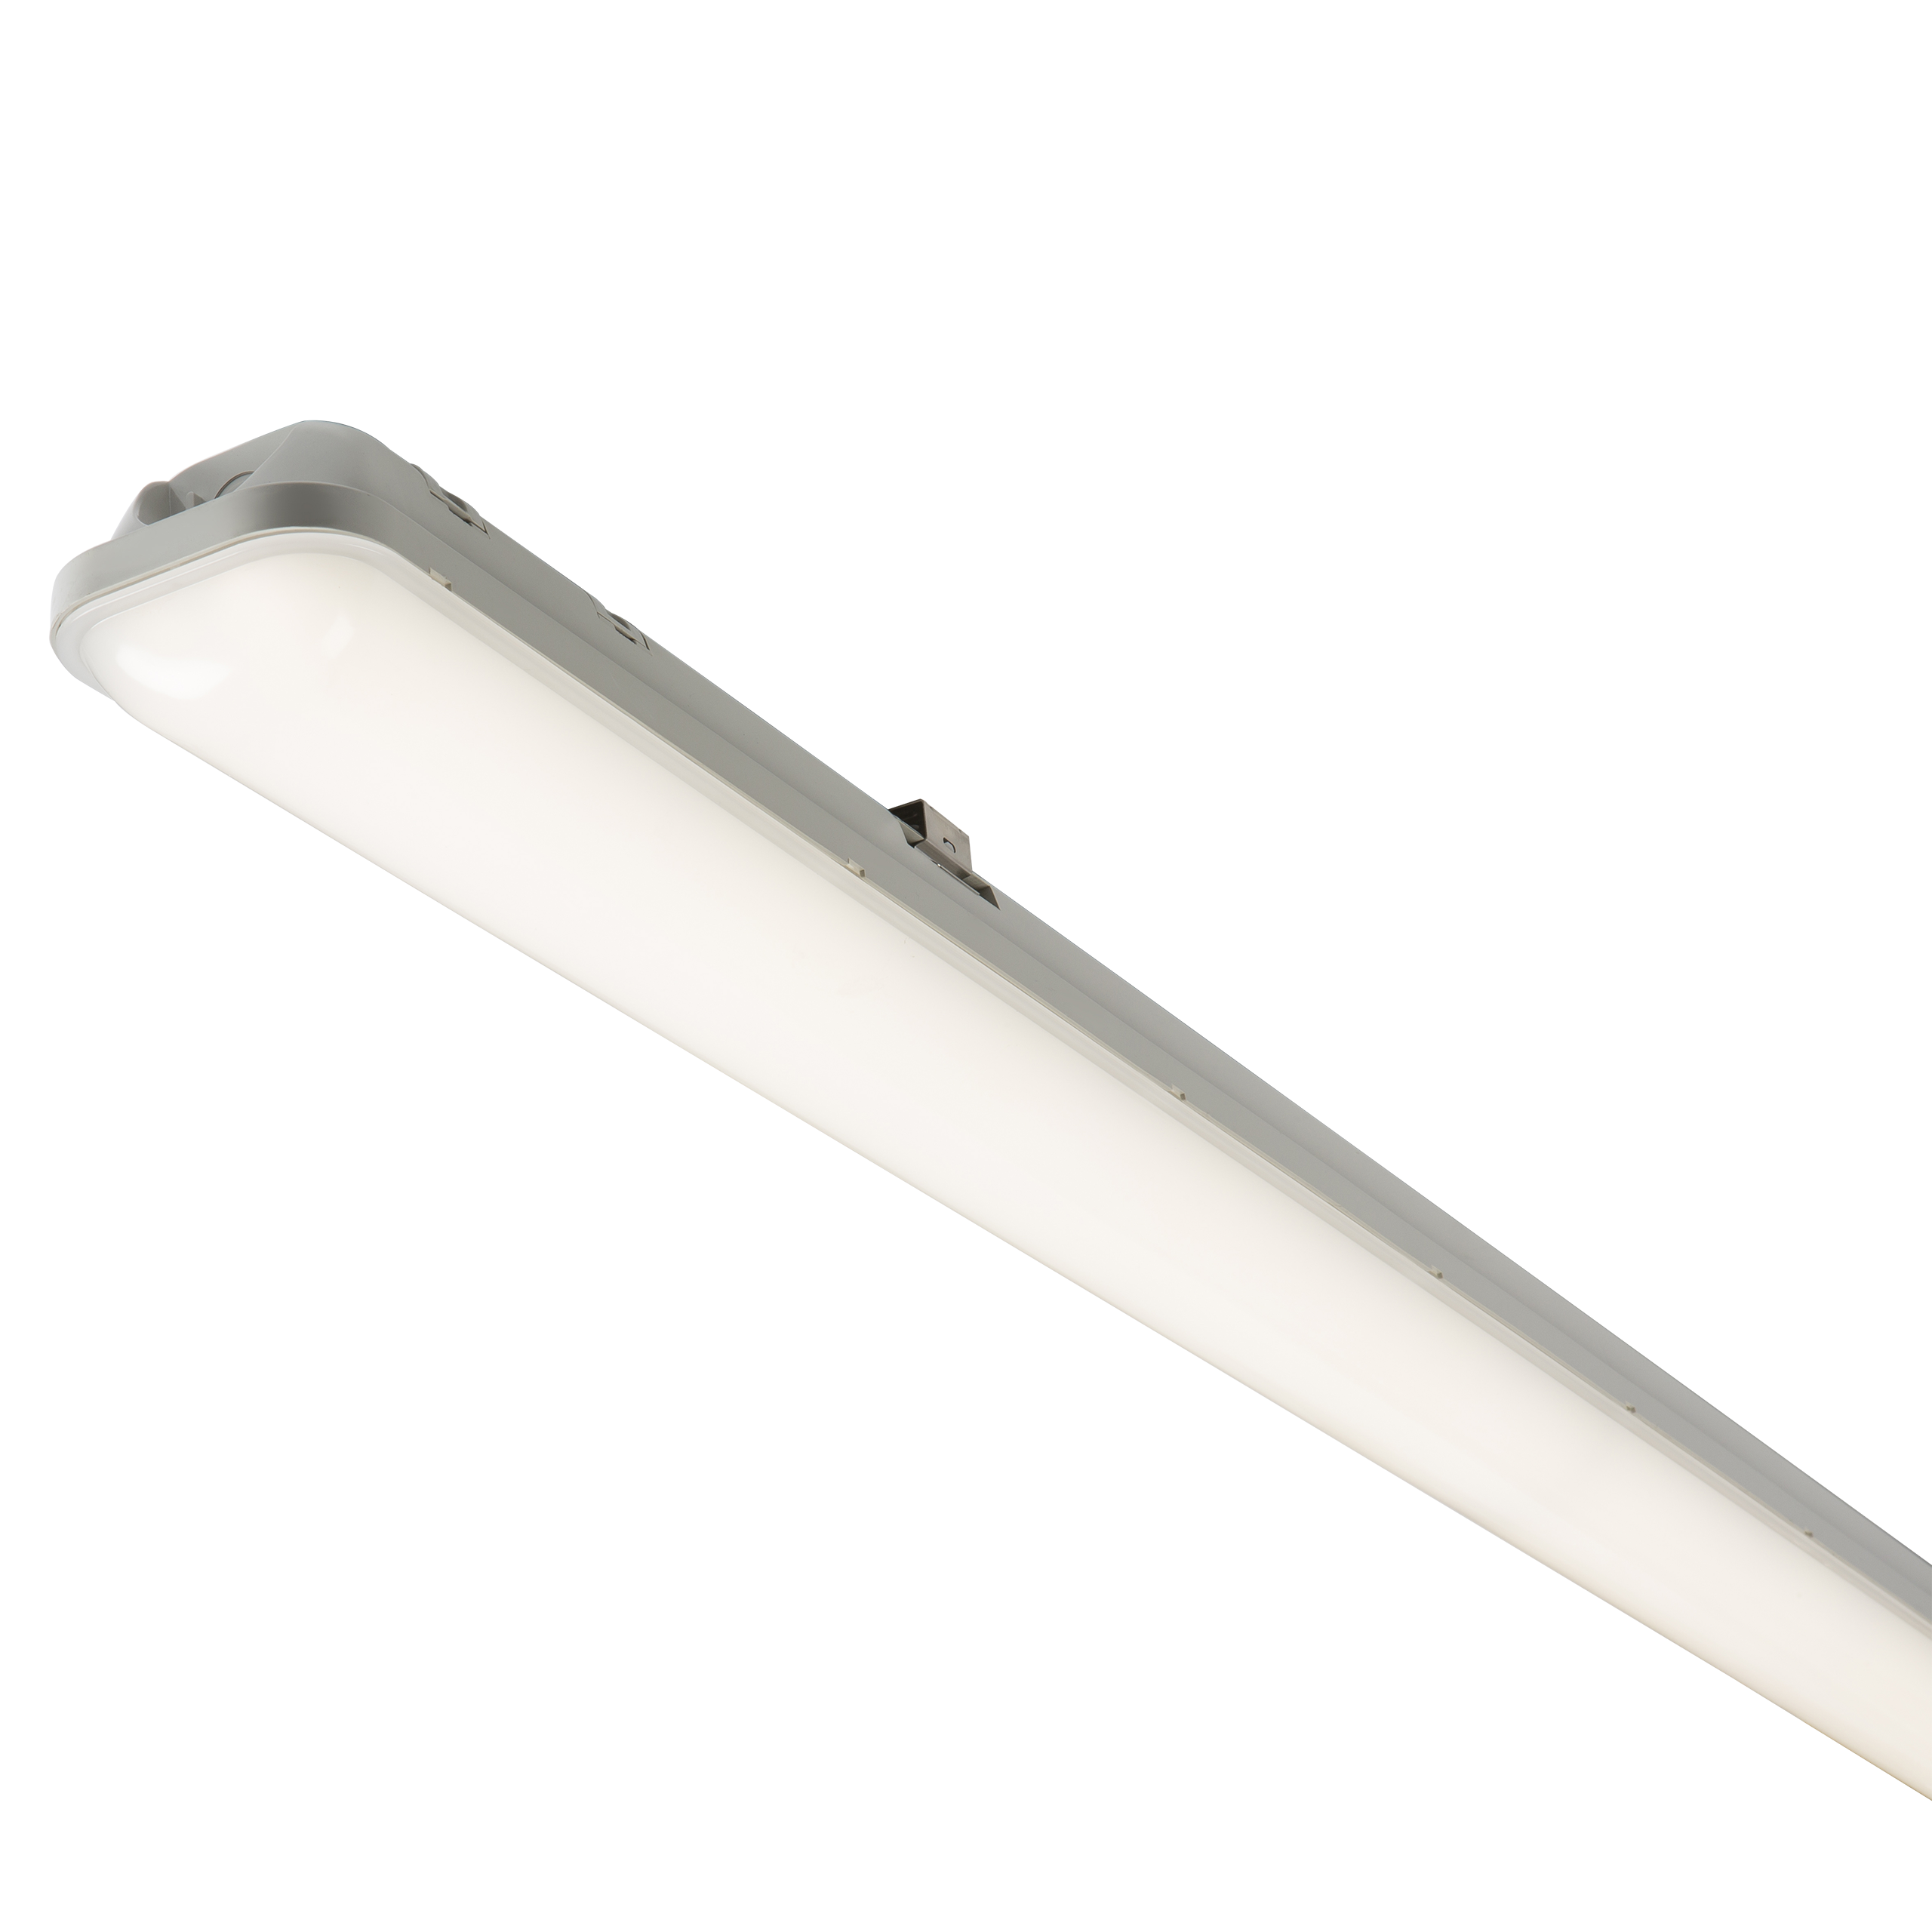 ML Accessories-NCLED48S 230V IP65 5ft 48W LED Non-Corrosive Fitting with Microwave Sensor - 1480mm